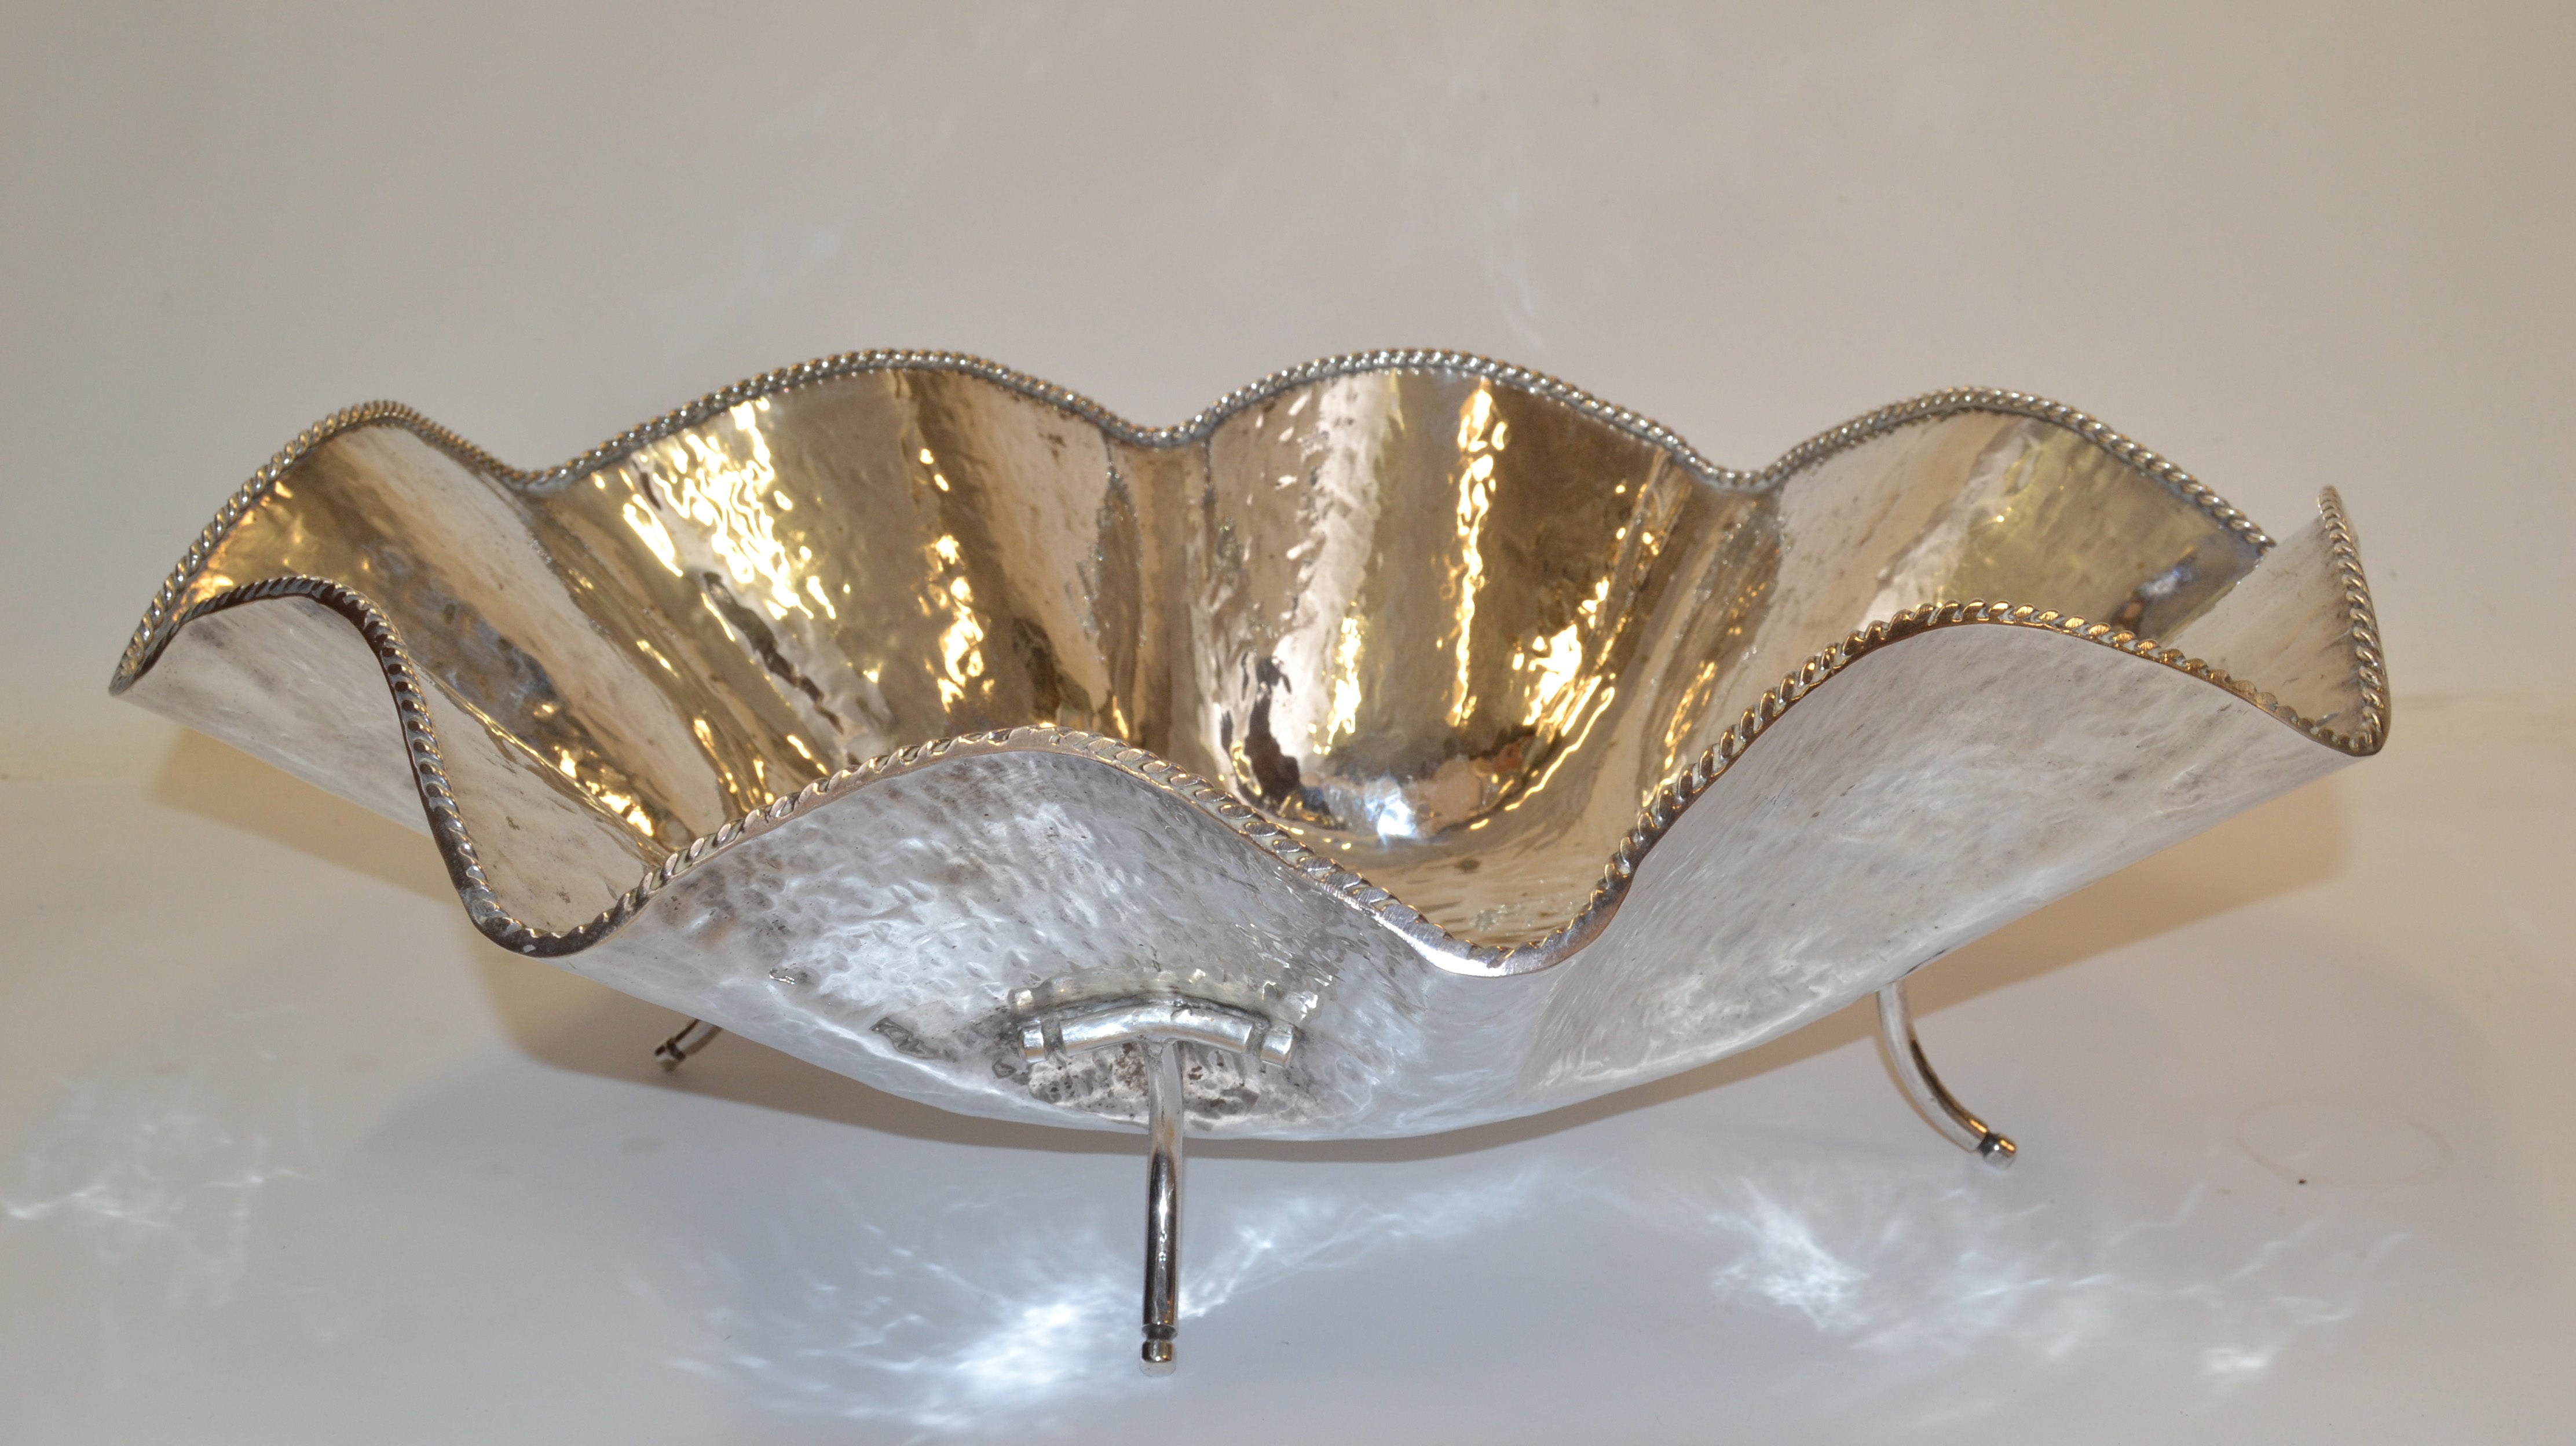 Beautiful Craftsmanship made in the late 20th century hand hammered and silver plate platter, serving tray or sculptural Bowl on 4 feet and in form of a lotus leaf.
In all original vintage condition with some patina to the silver plate.